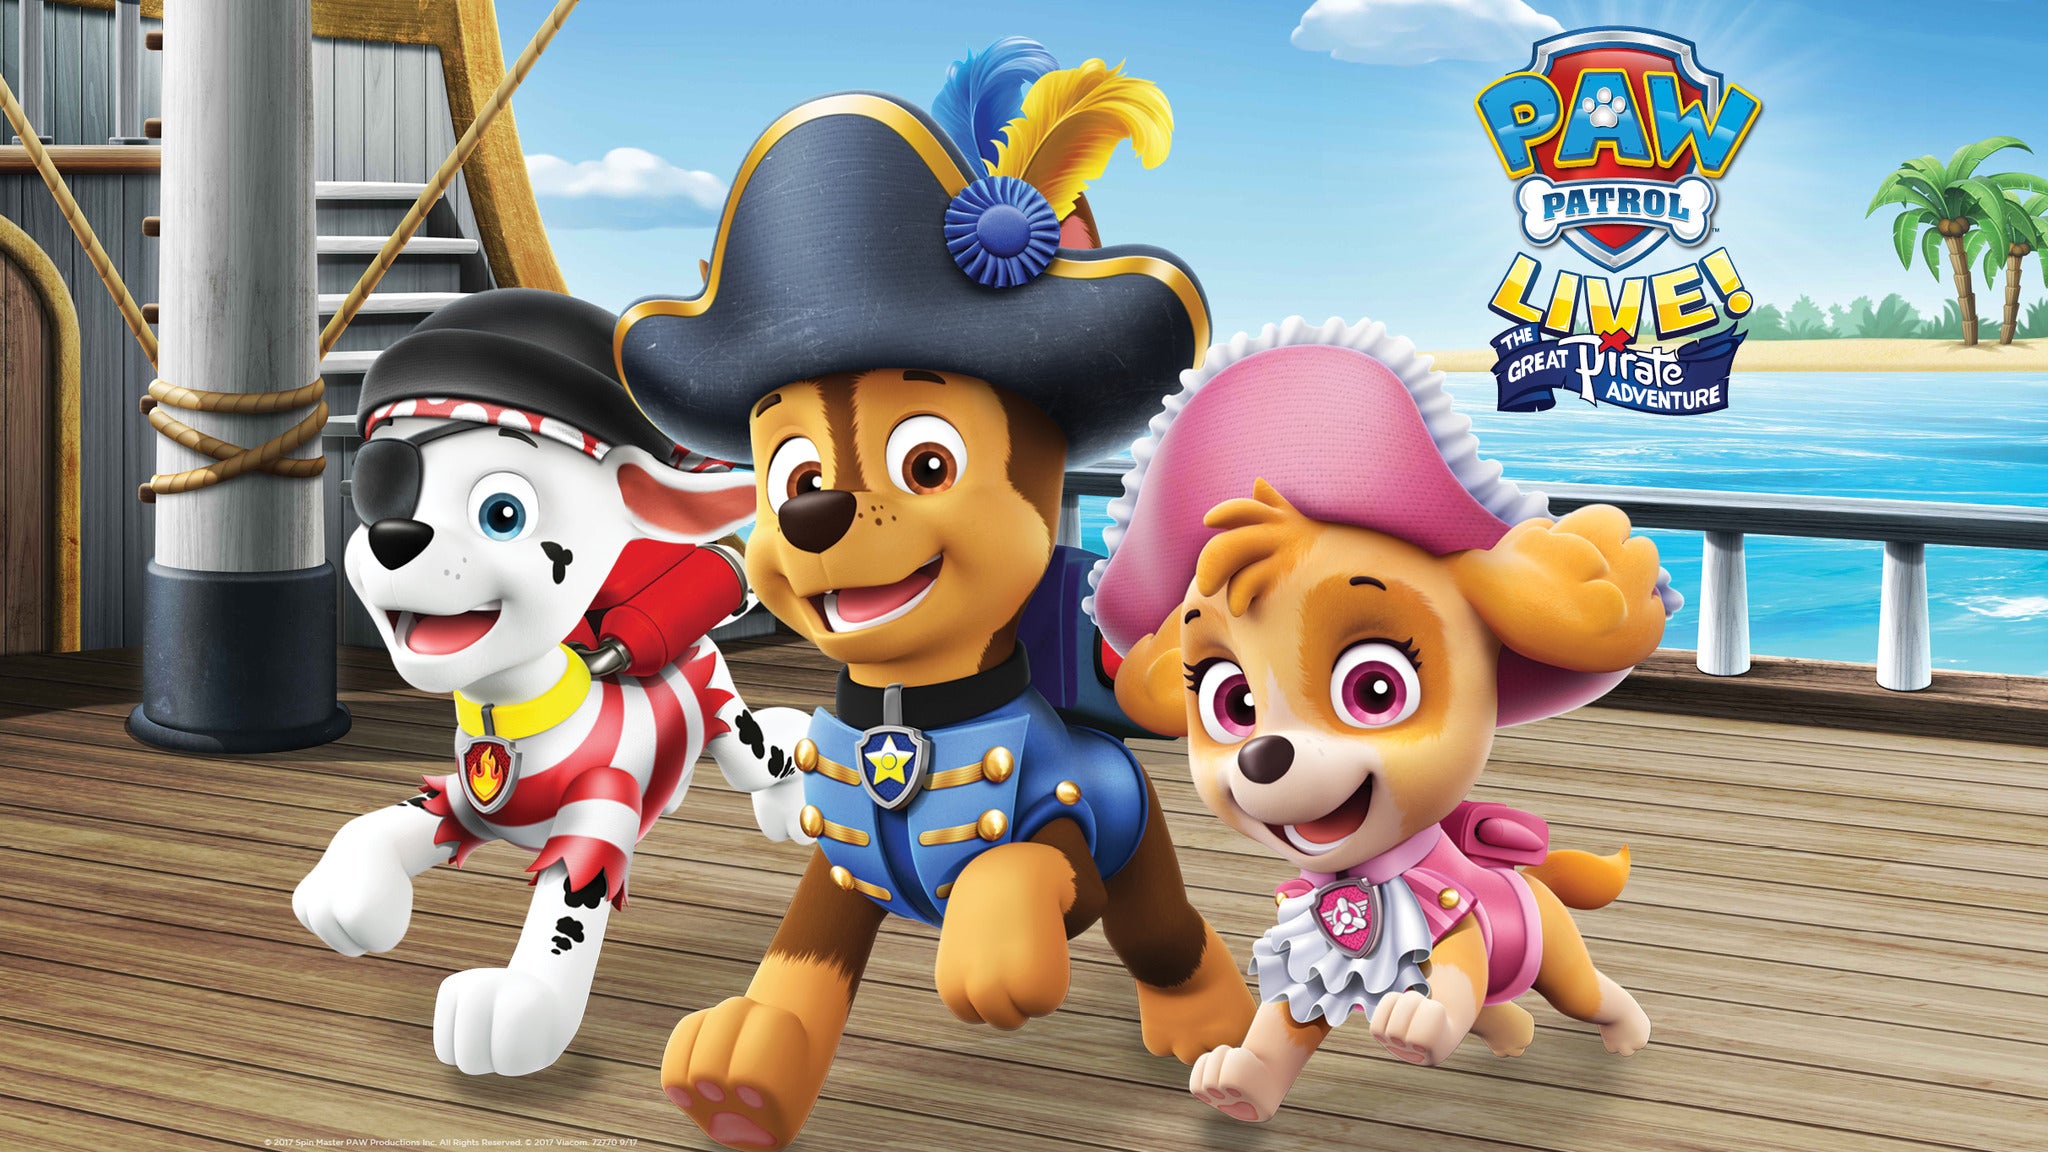 PAW Patrol Live! The Great Pirate Adventure in Newark promo photo for Exclusive presale offer code